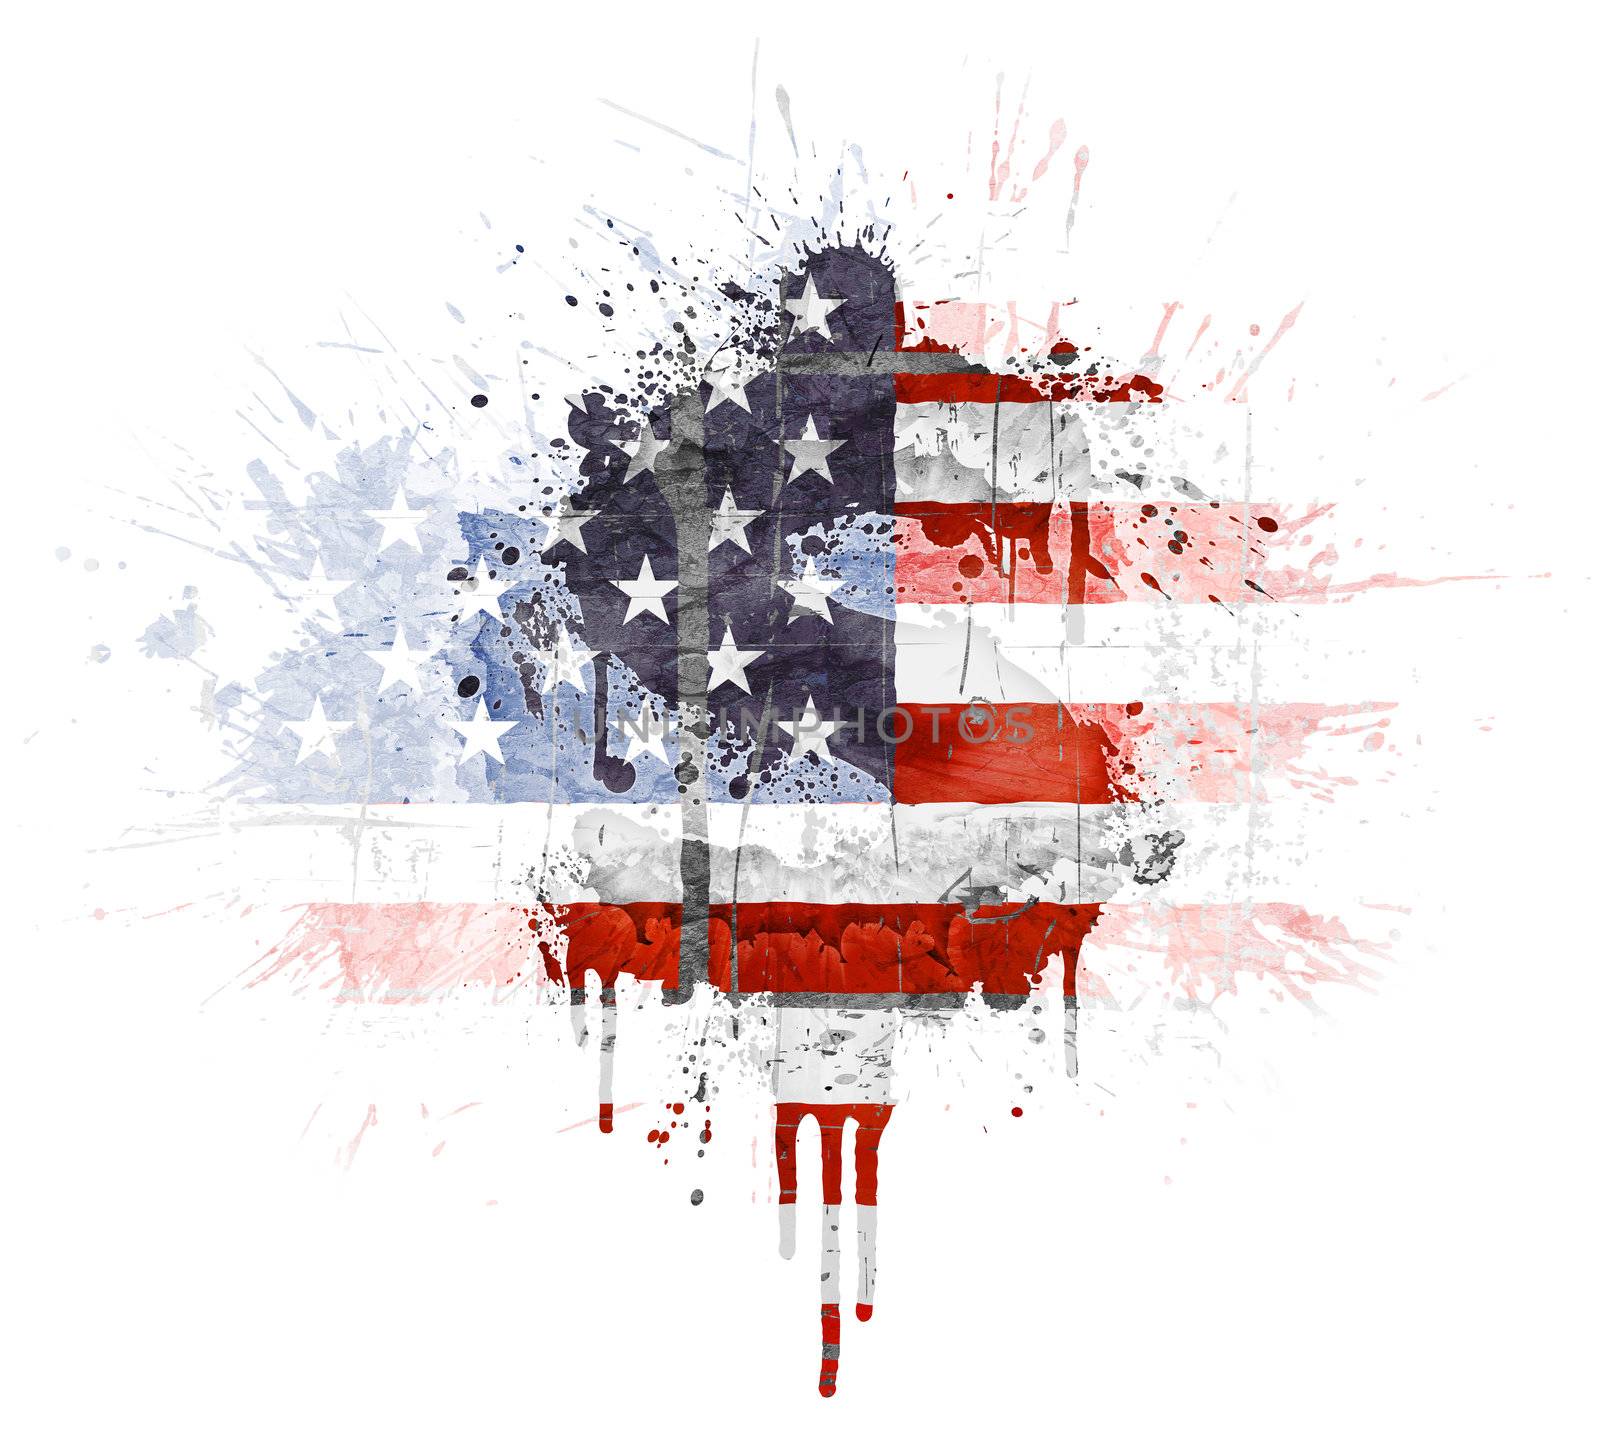 Modern grunge splatter design with American flag, Dollar symbol. Distressed grungy look with ink drop explosion.